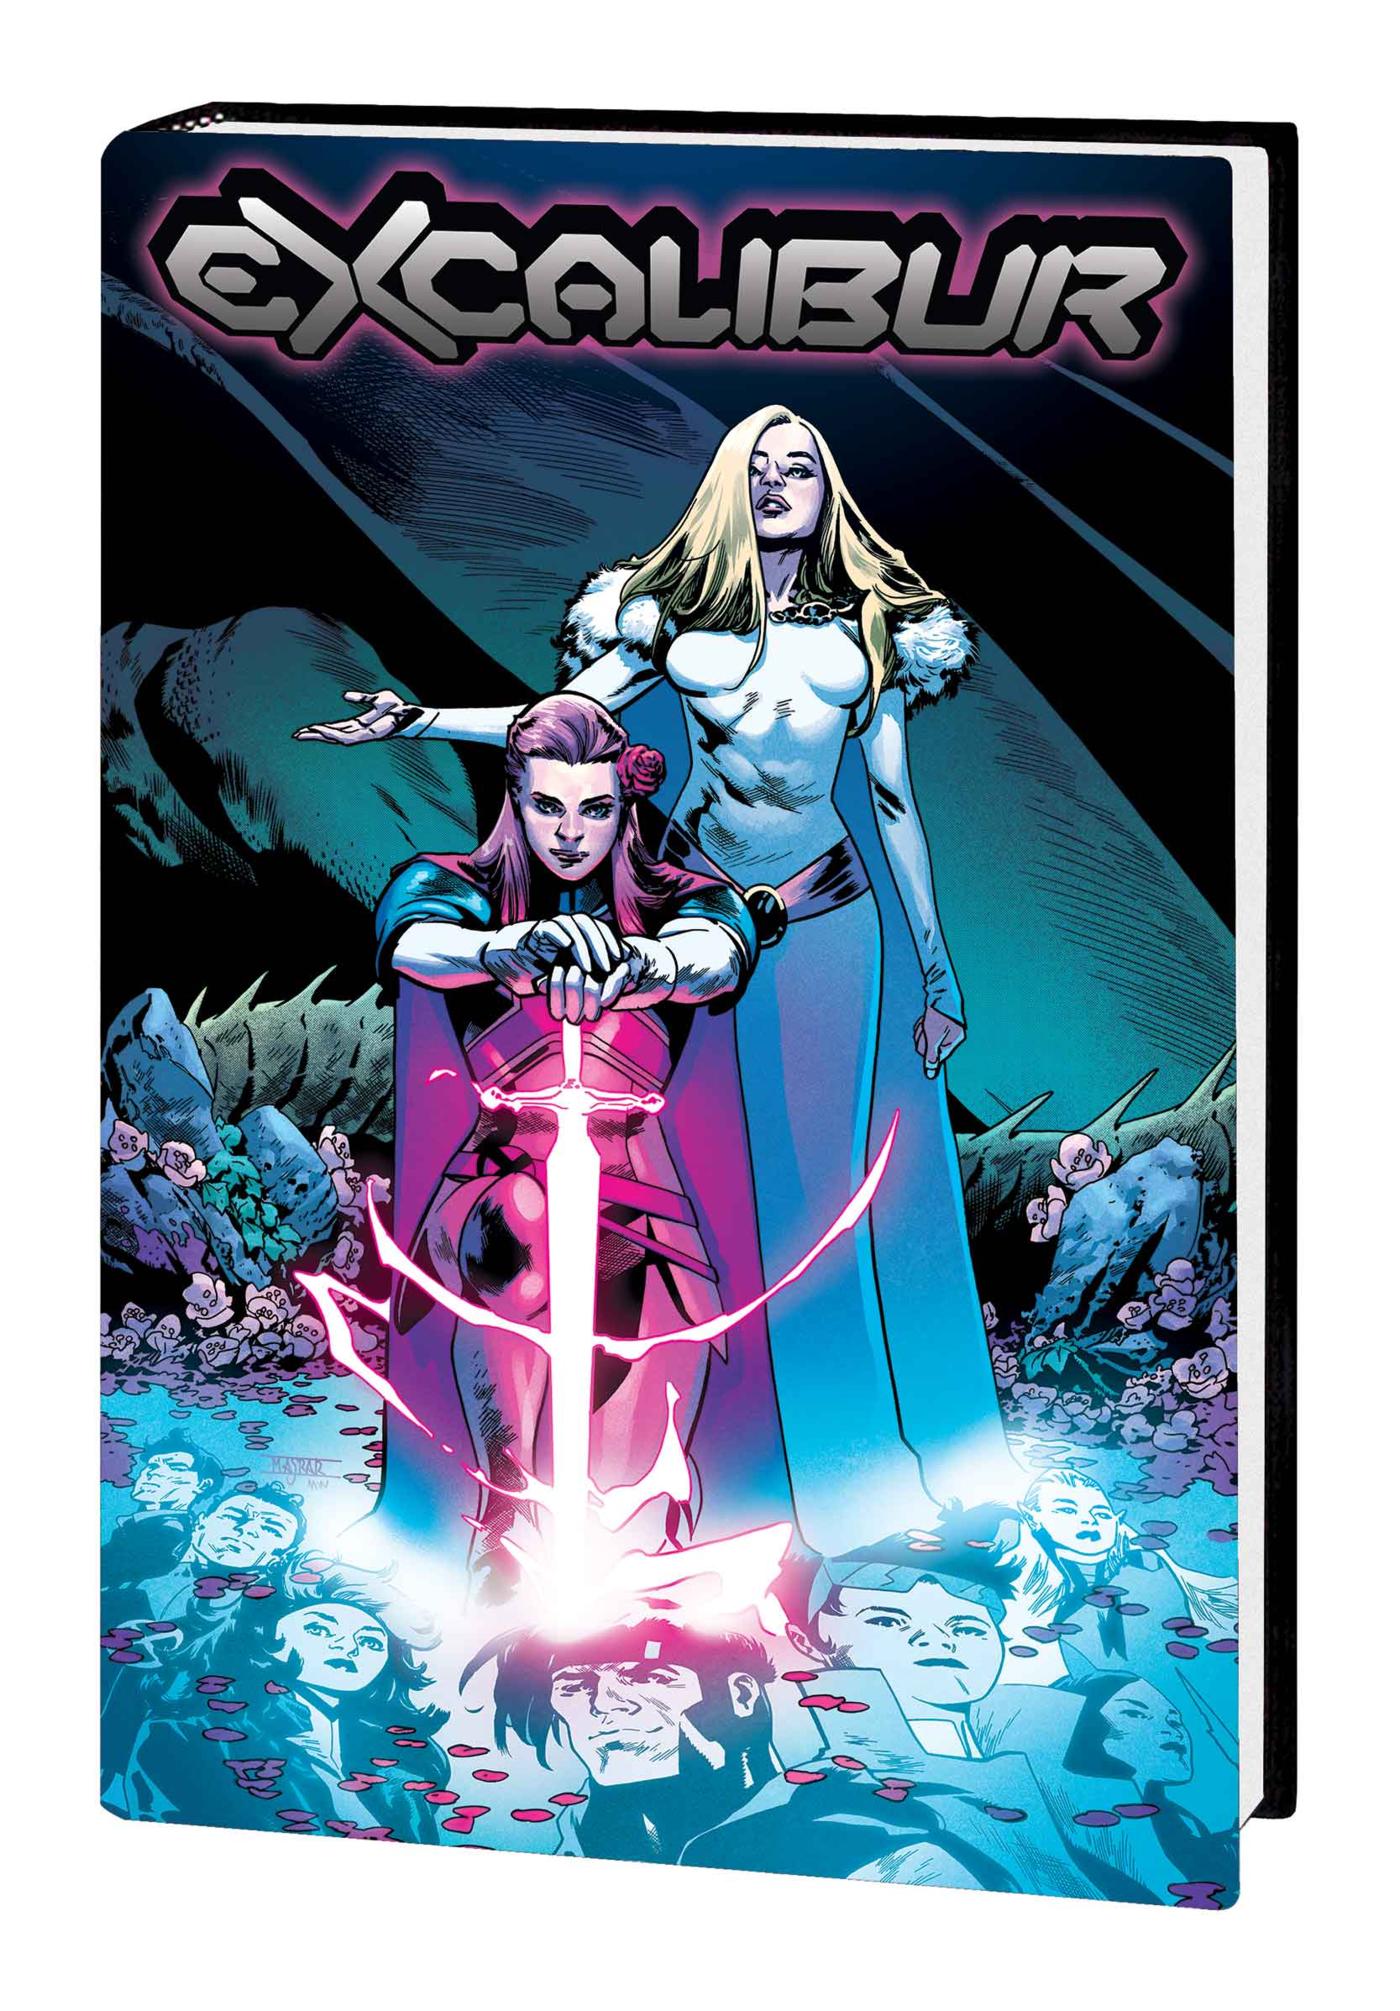 Excalibur by Tini Howard Vol 2 Hardcover